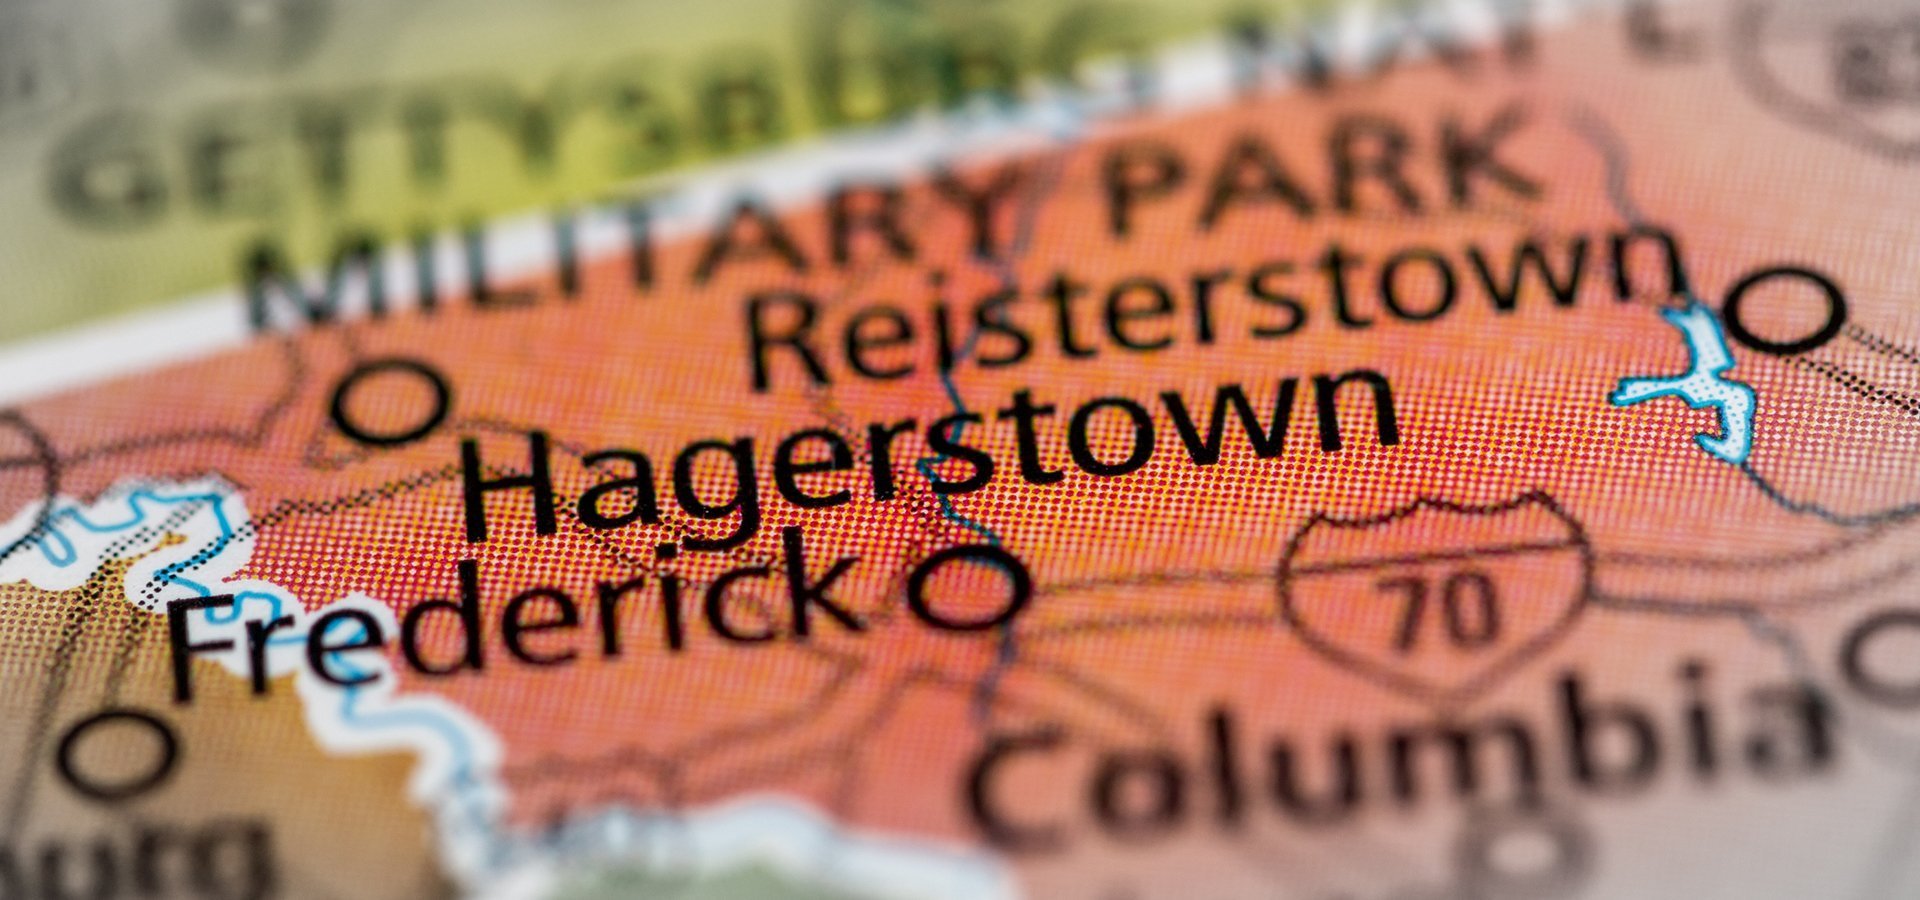 hagerstown md map reminds us of awakenings recovery center press